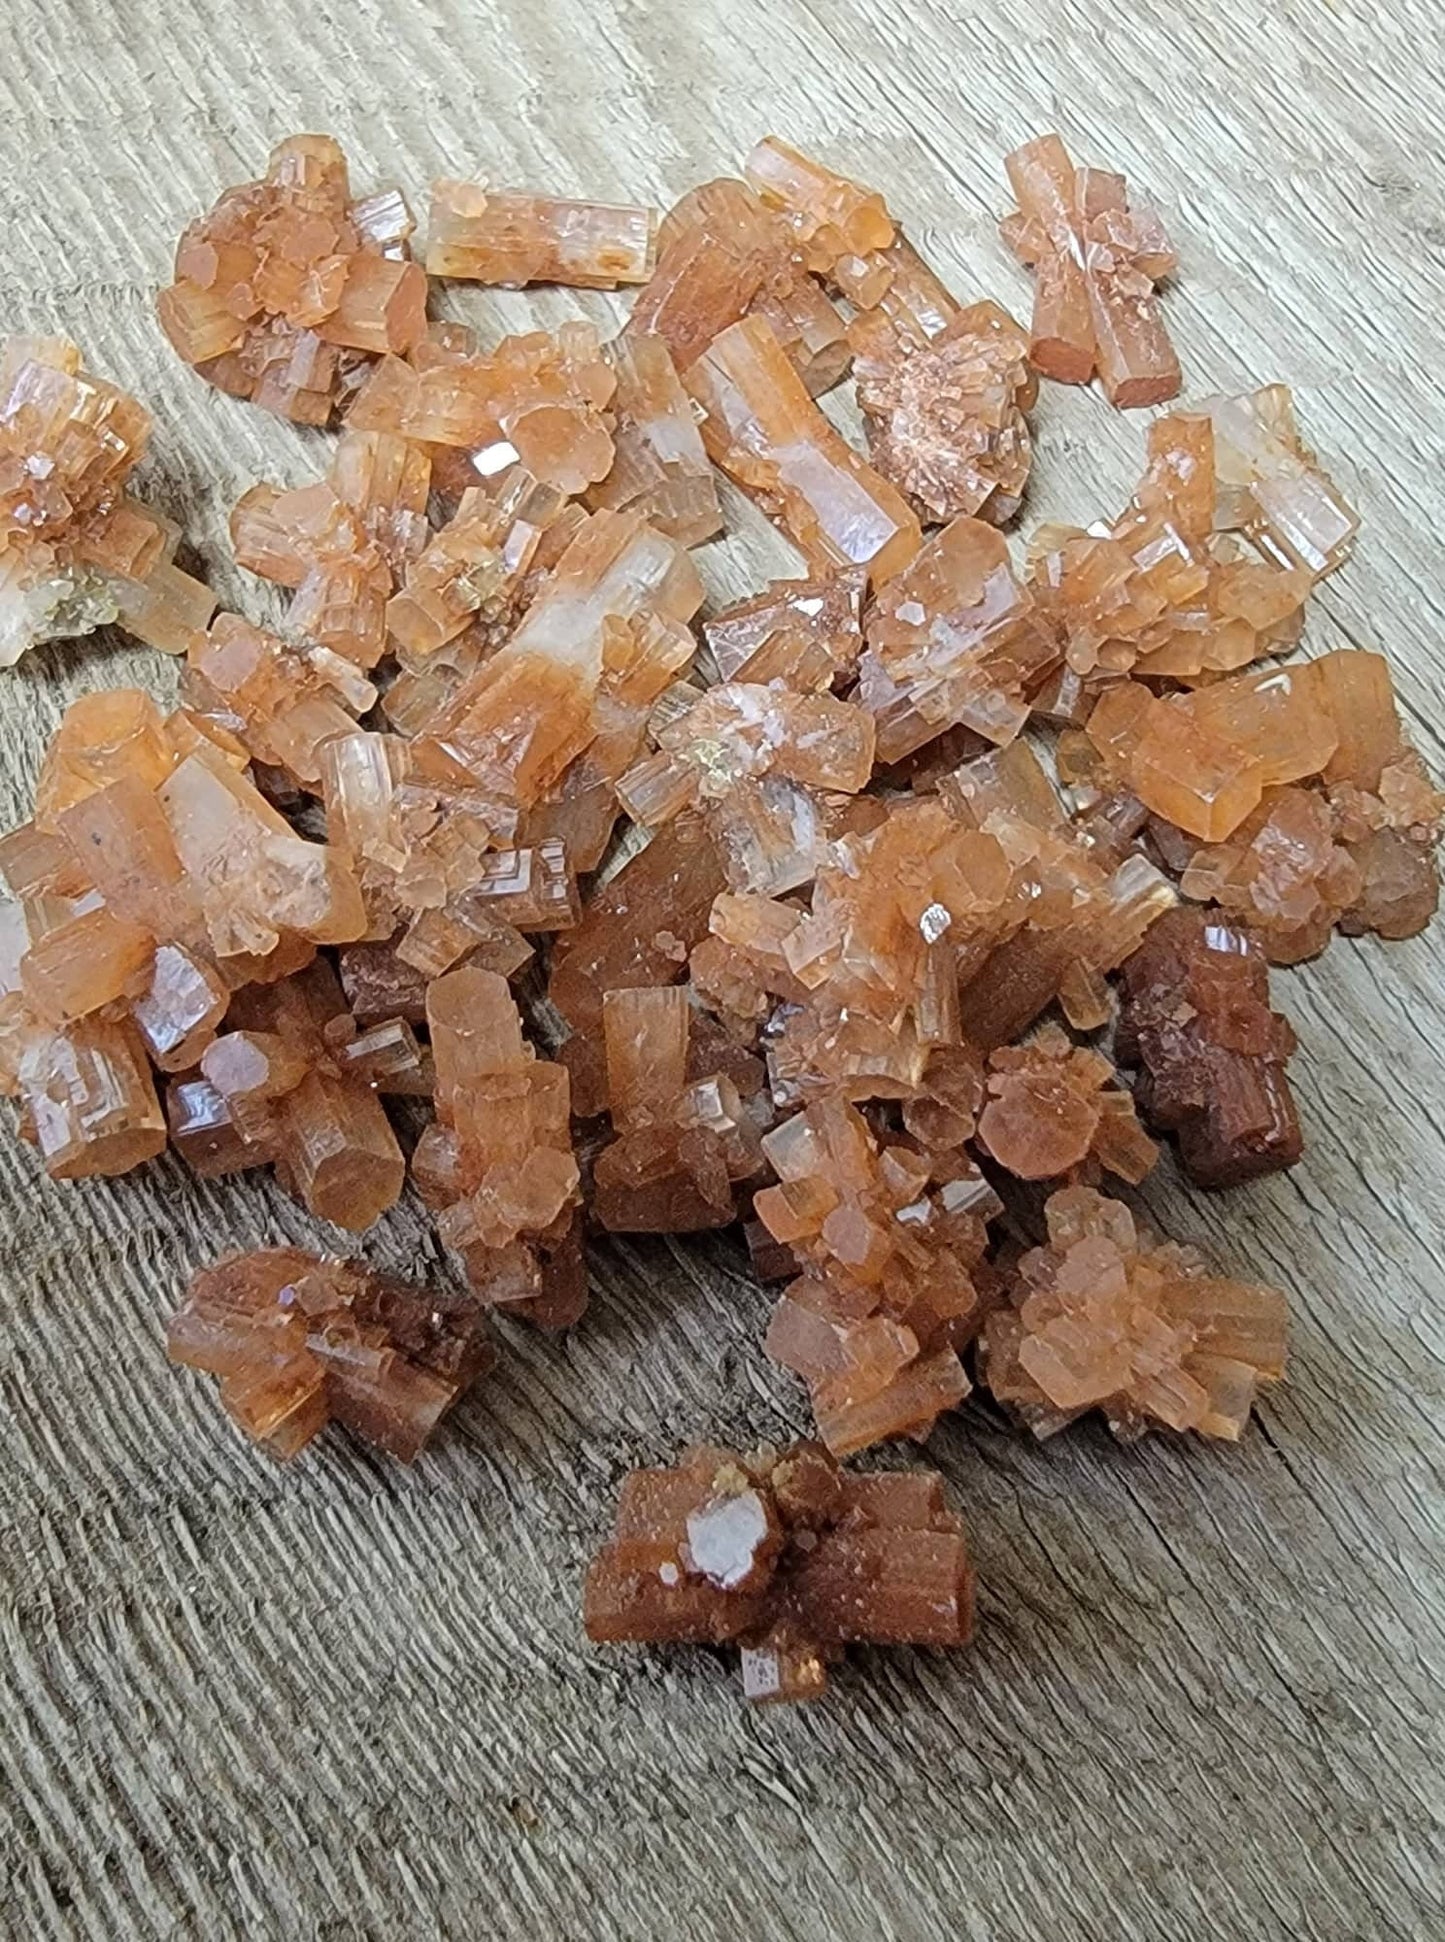 Aragonite Small/Tiny Crystal Cluster Explosion. Grounding Focused Attention 1320 (Approx. 5/8" - 1")